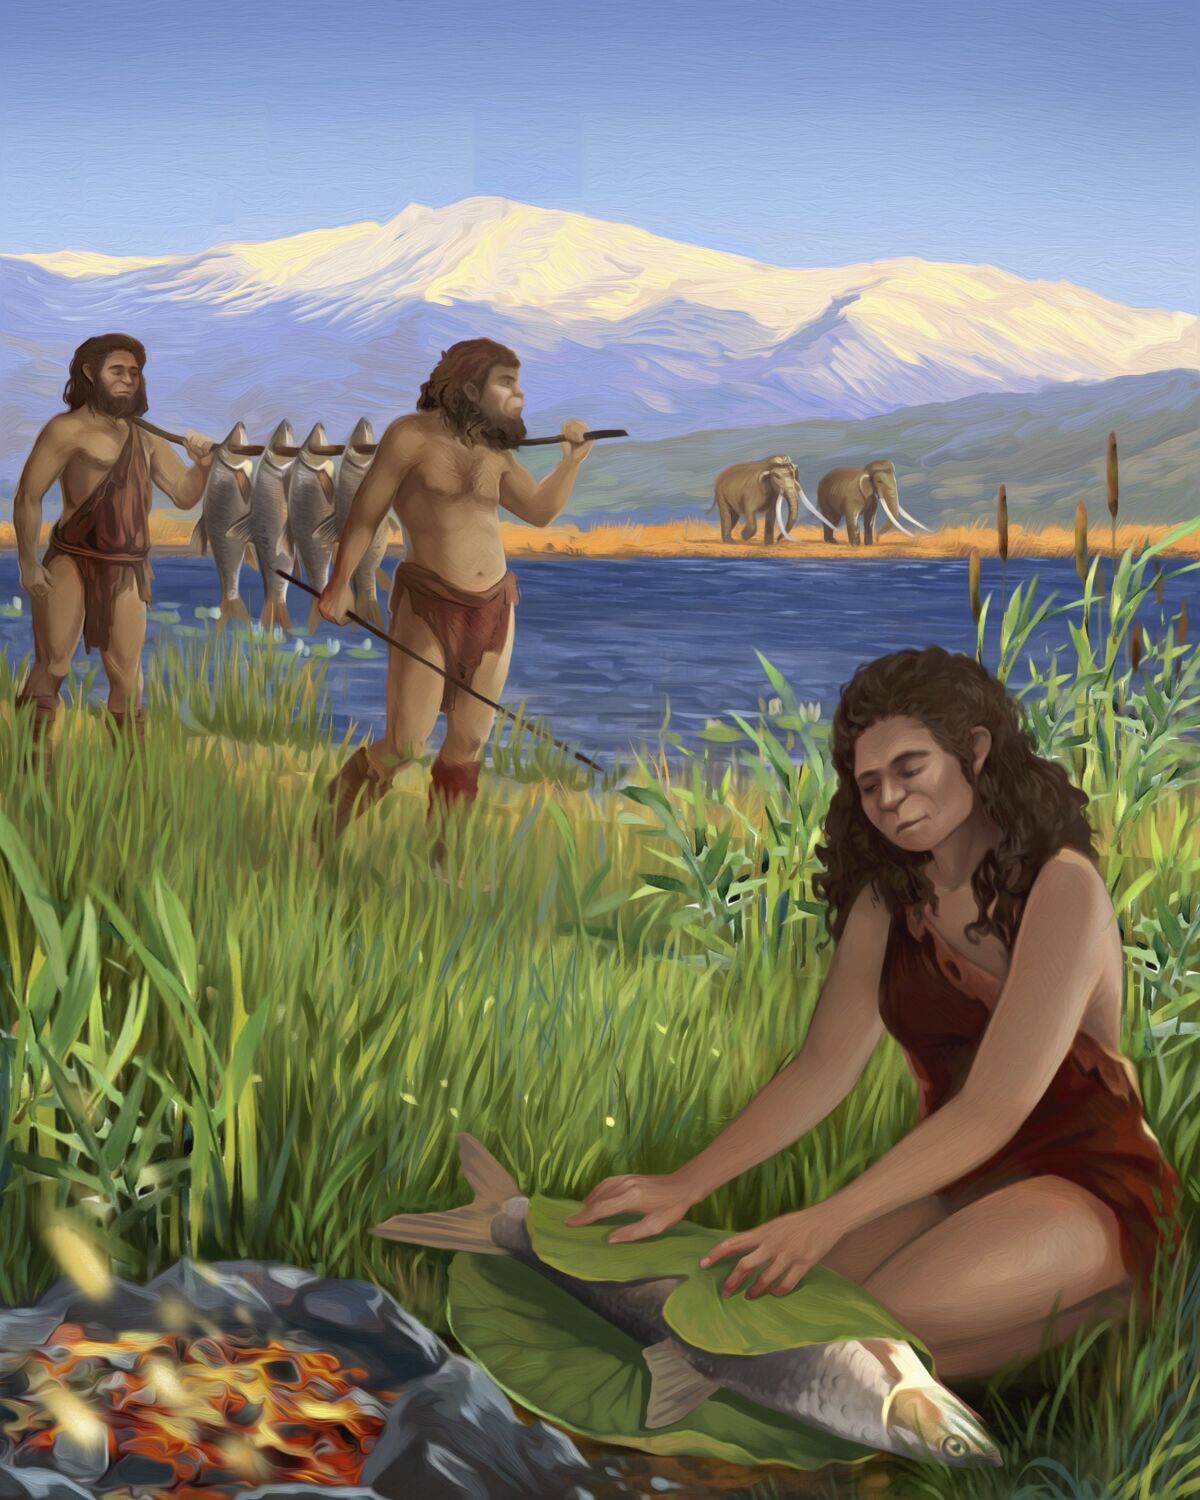 An illustration shows early humans preparing food.